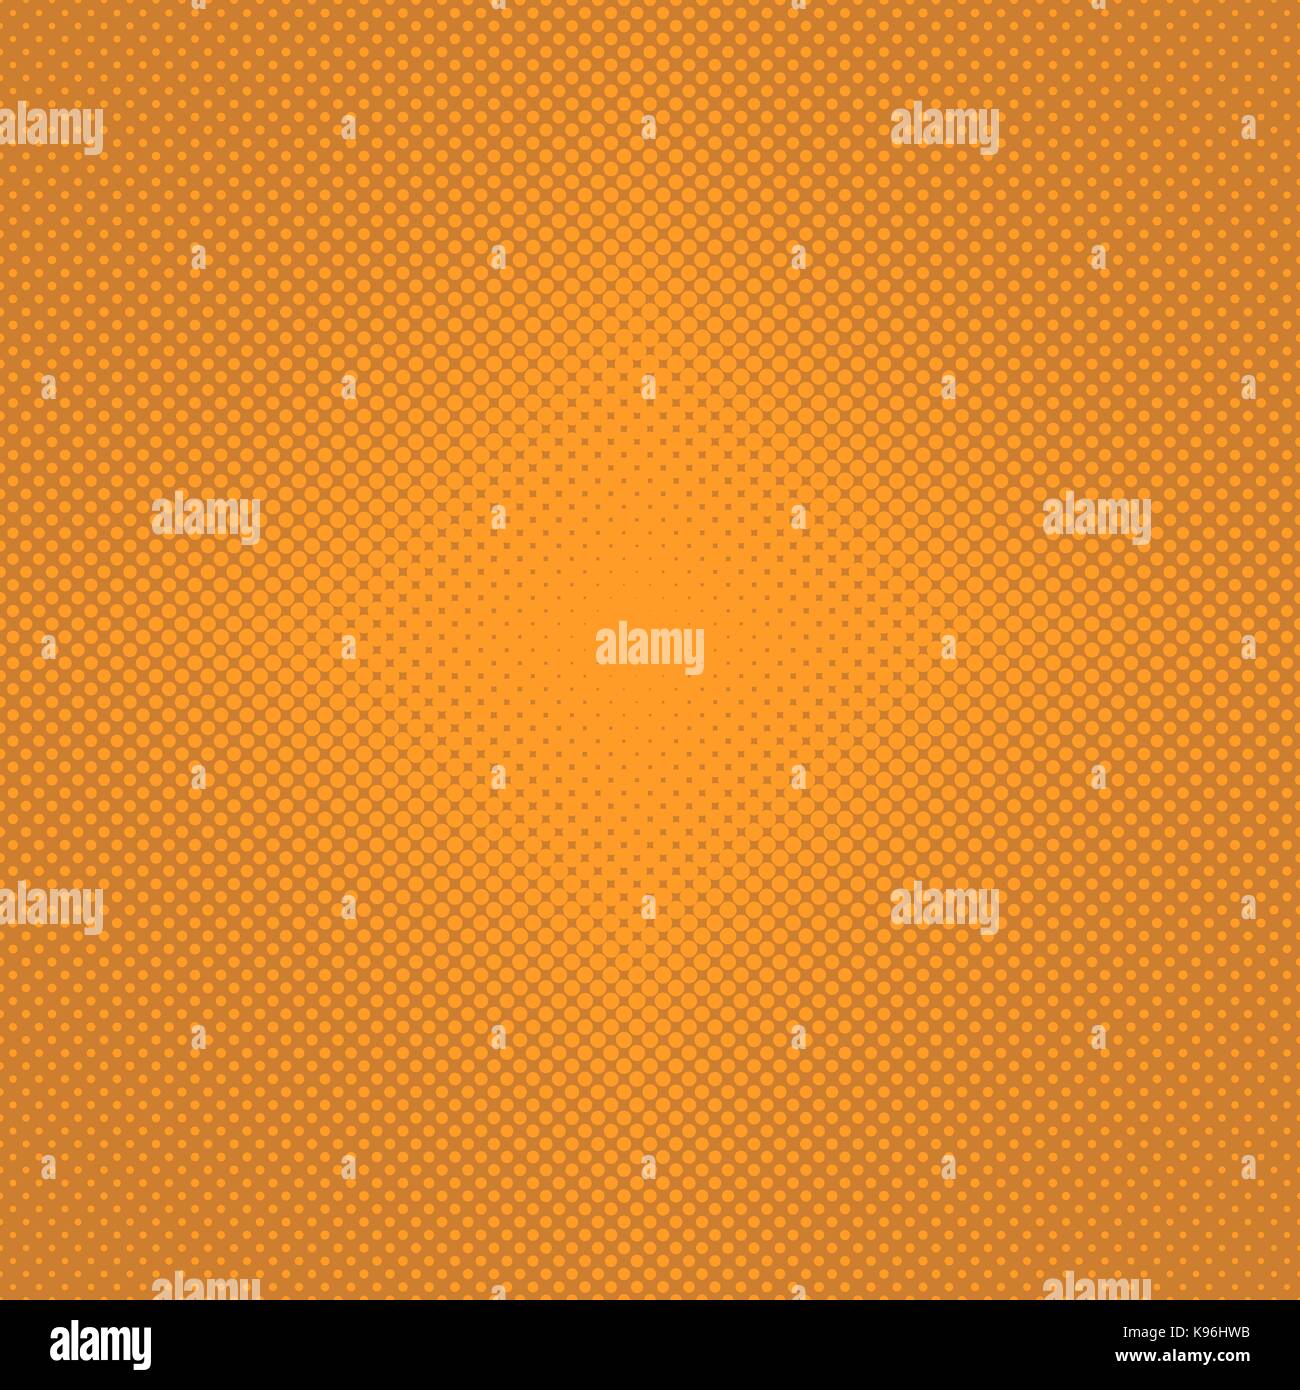 Abstract halftone dot pattern background - vector graphic design from orange circles Stock Vector